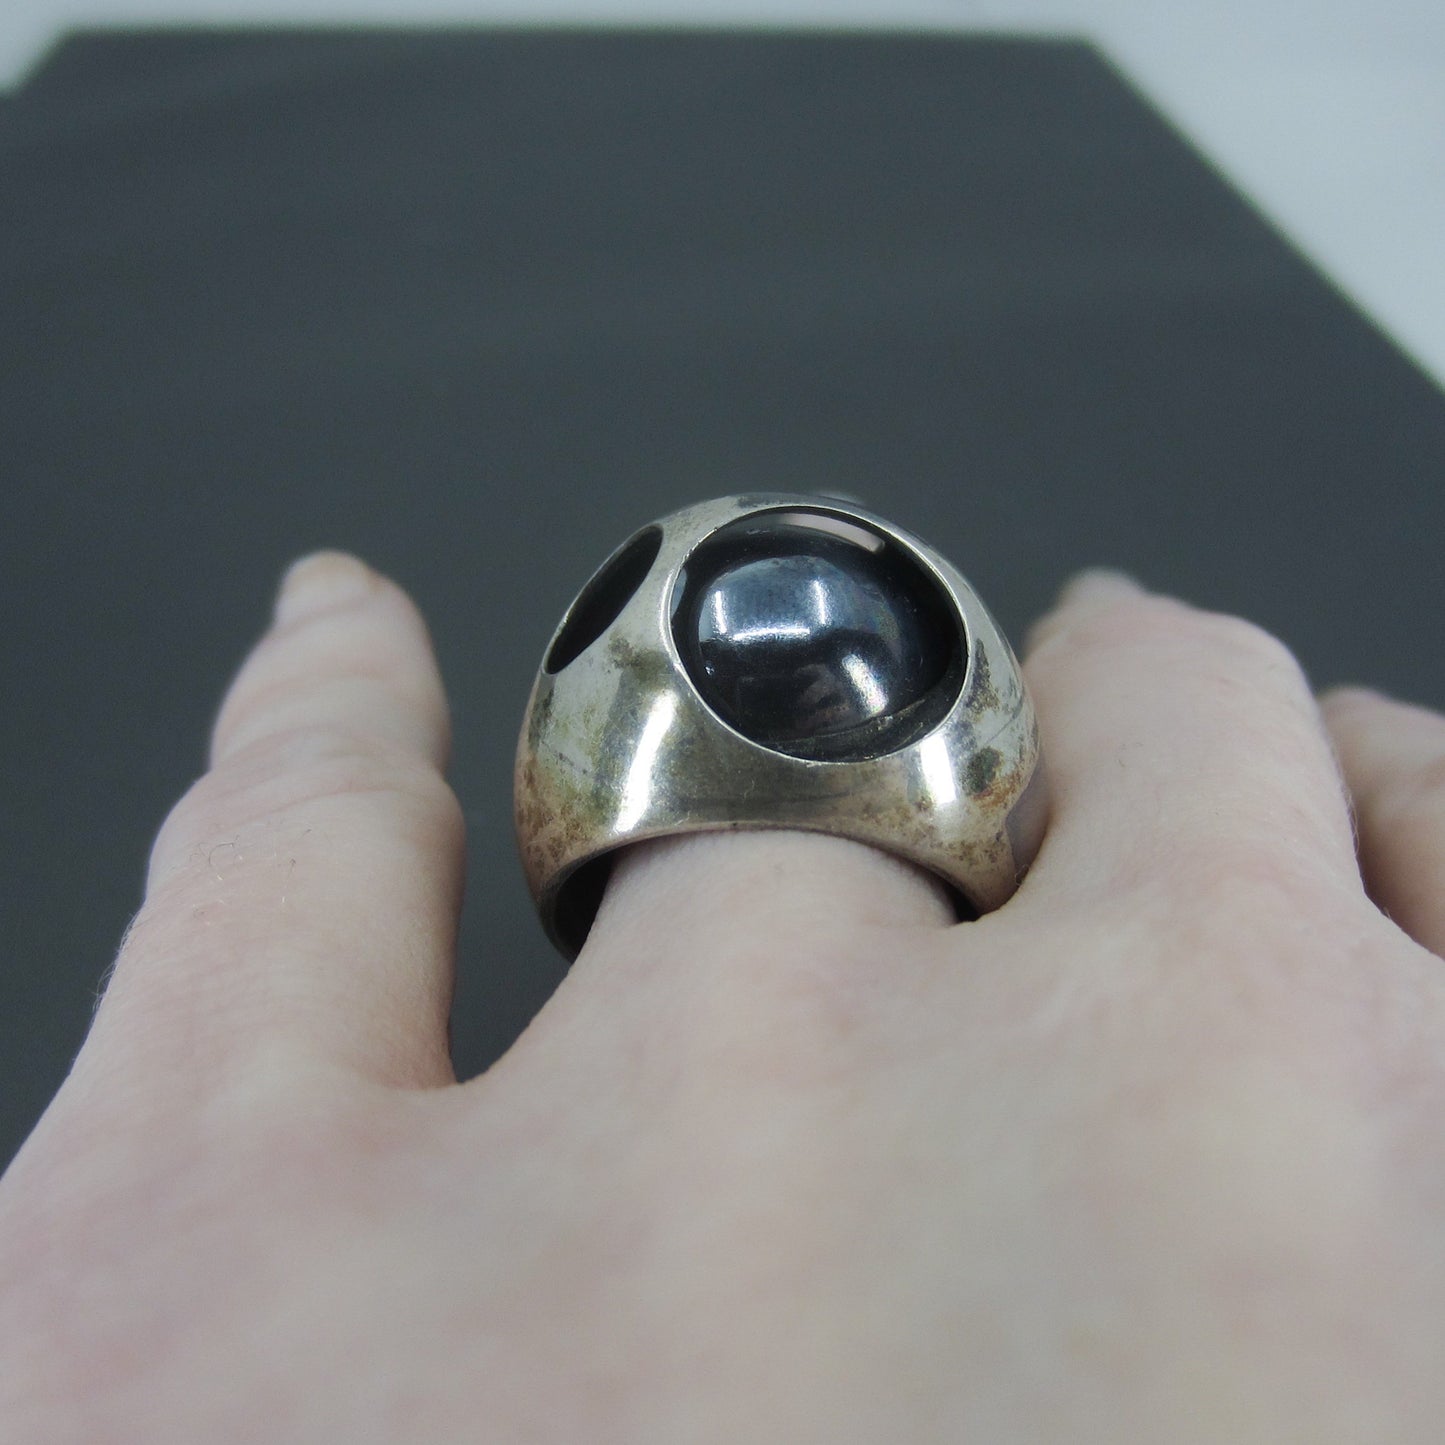 SOLD--Very Cool Post-Modern Hematite Dome Ring Sterling, Poland c. 1990